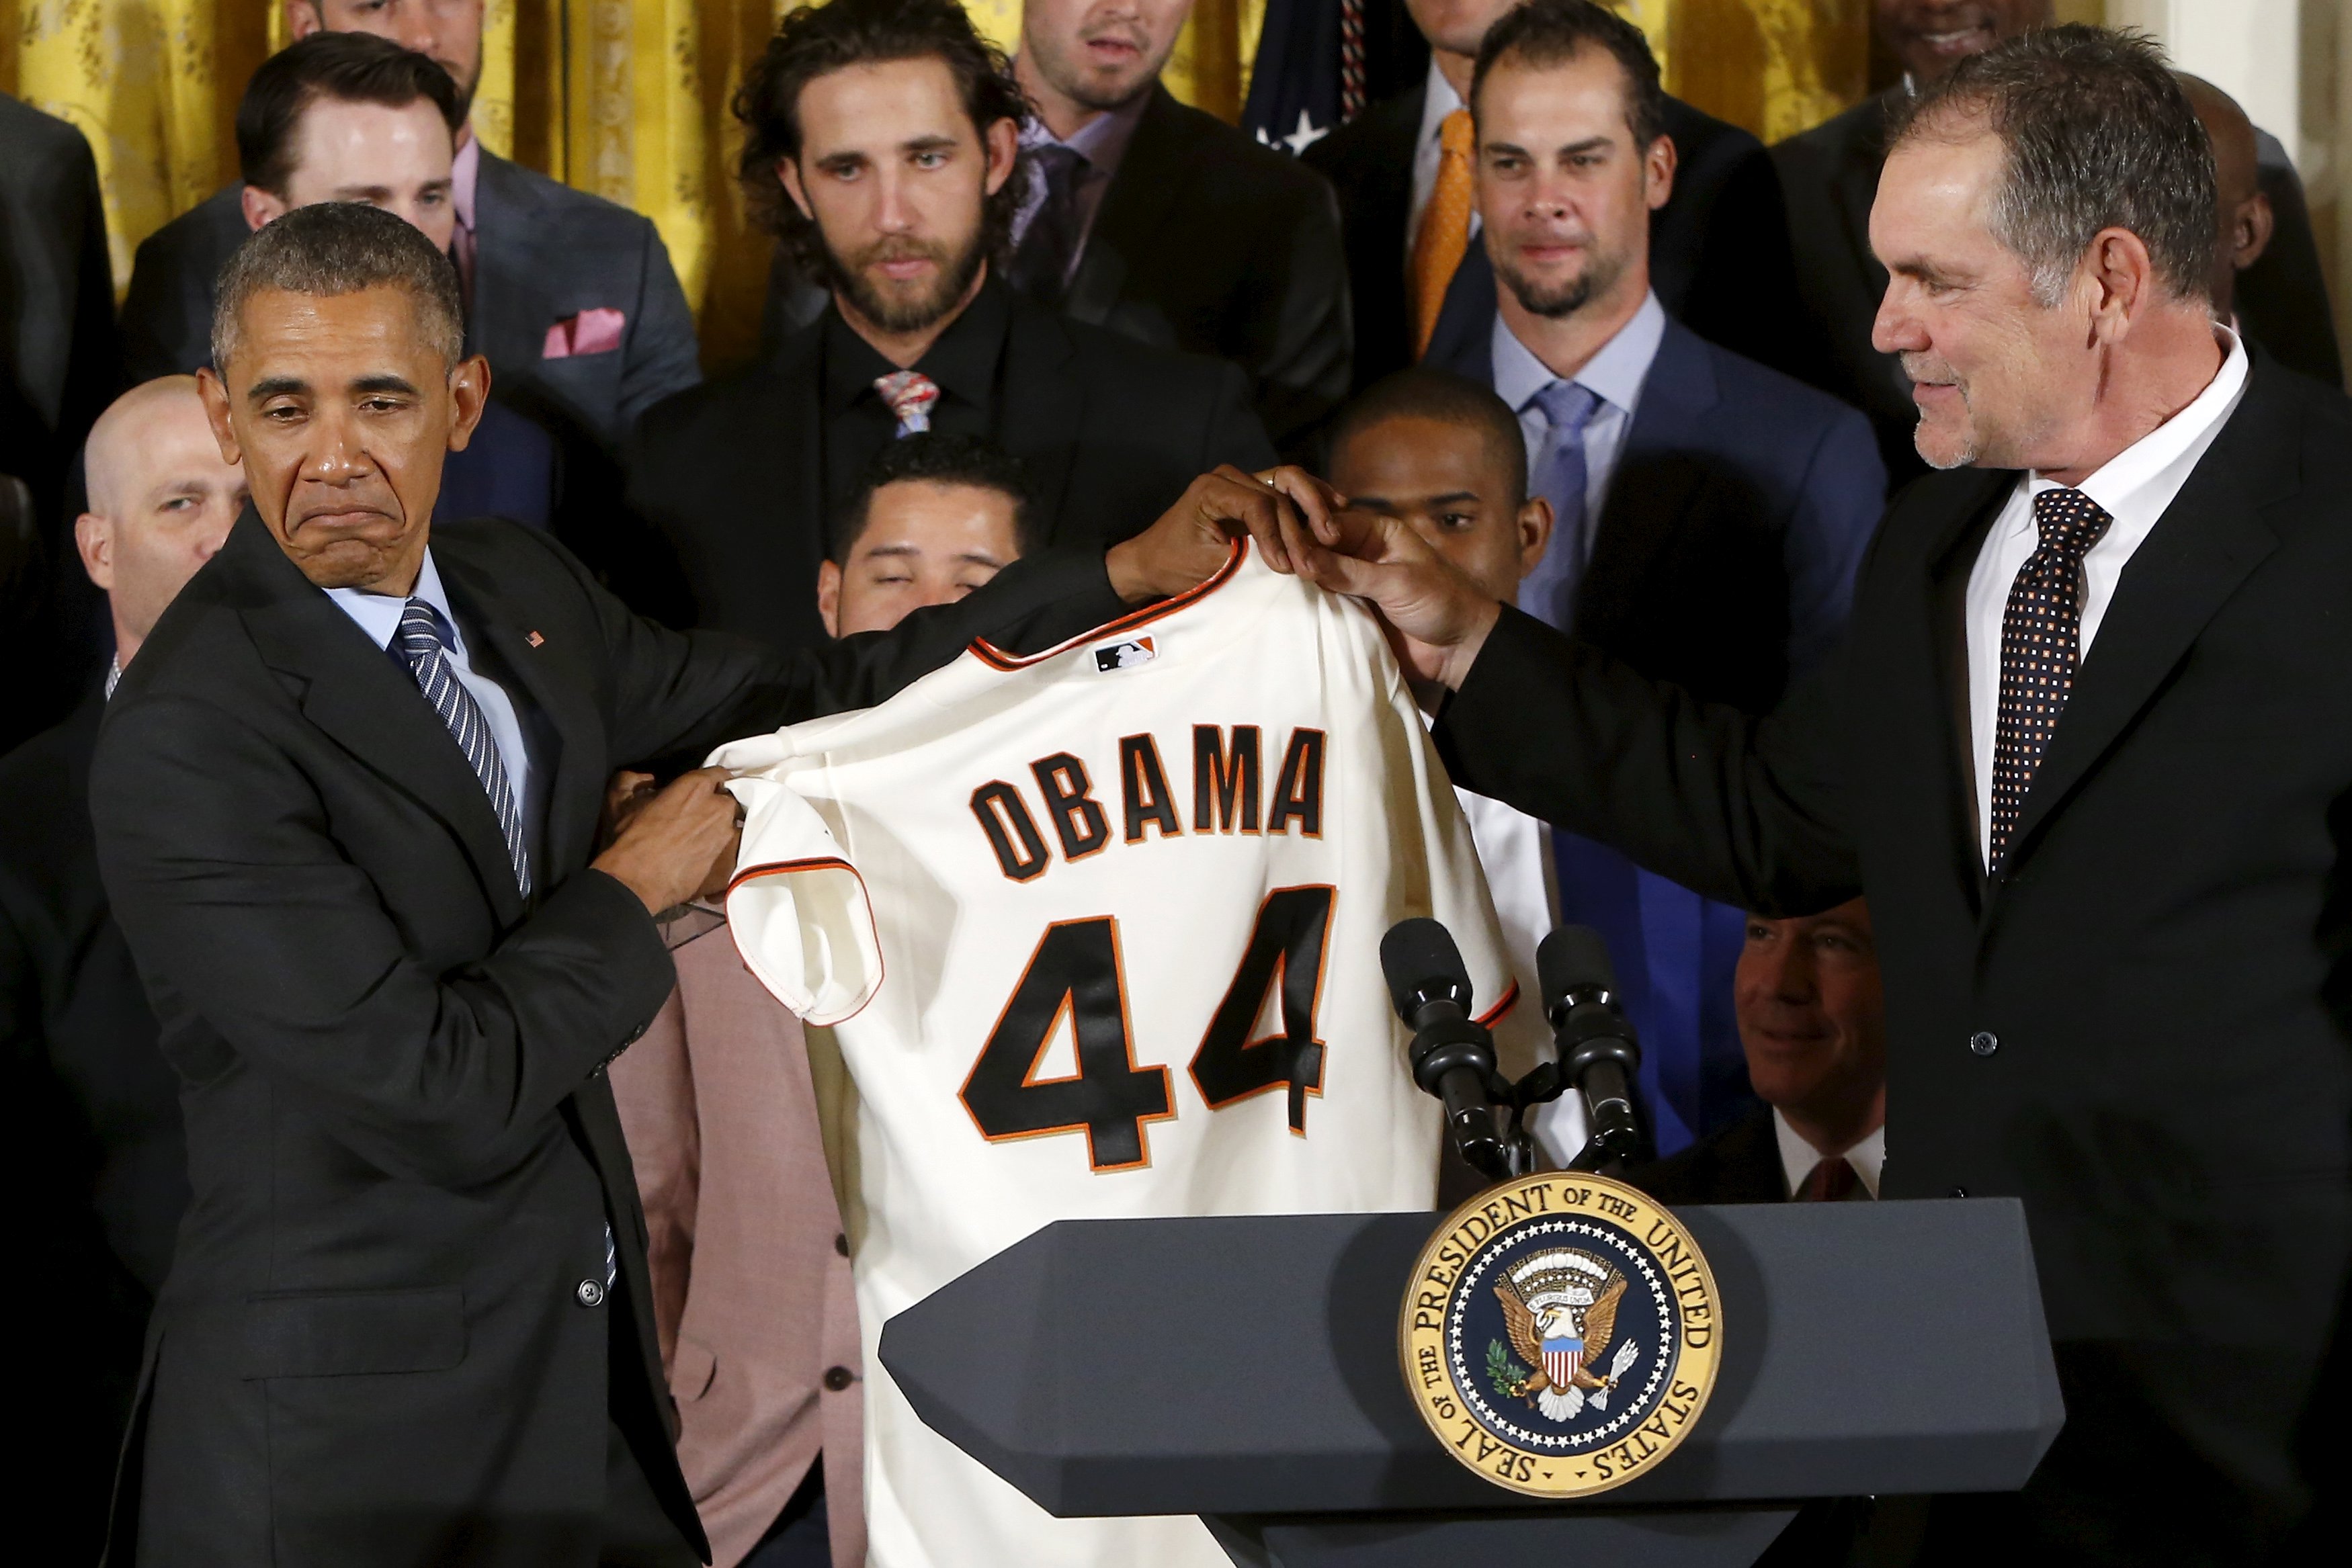 Obama reacts as he receives a team jersey from Bochy as he plays host to a reception for the San Francisco Giants in the East Room of the White House in Washington